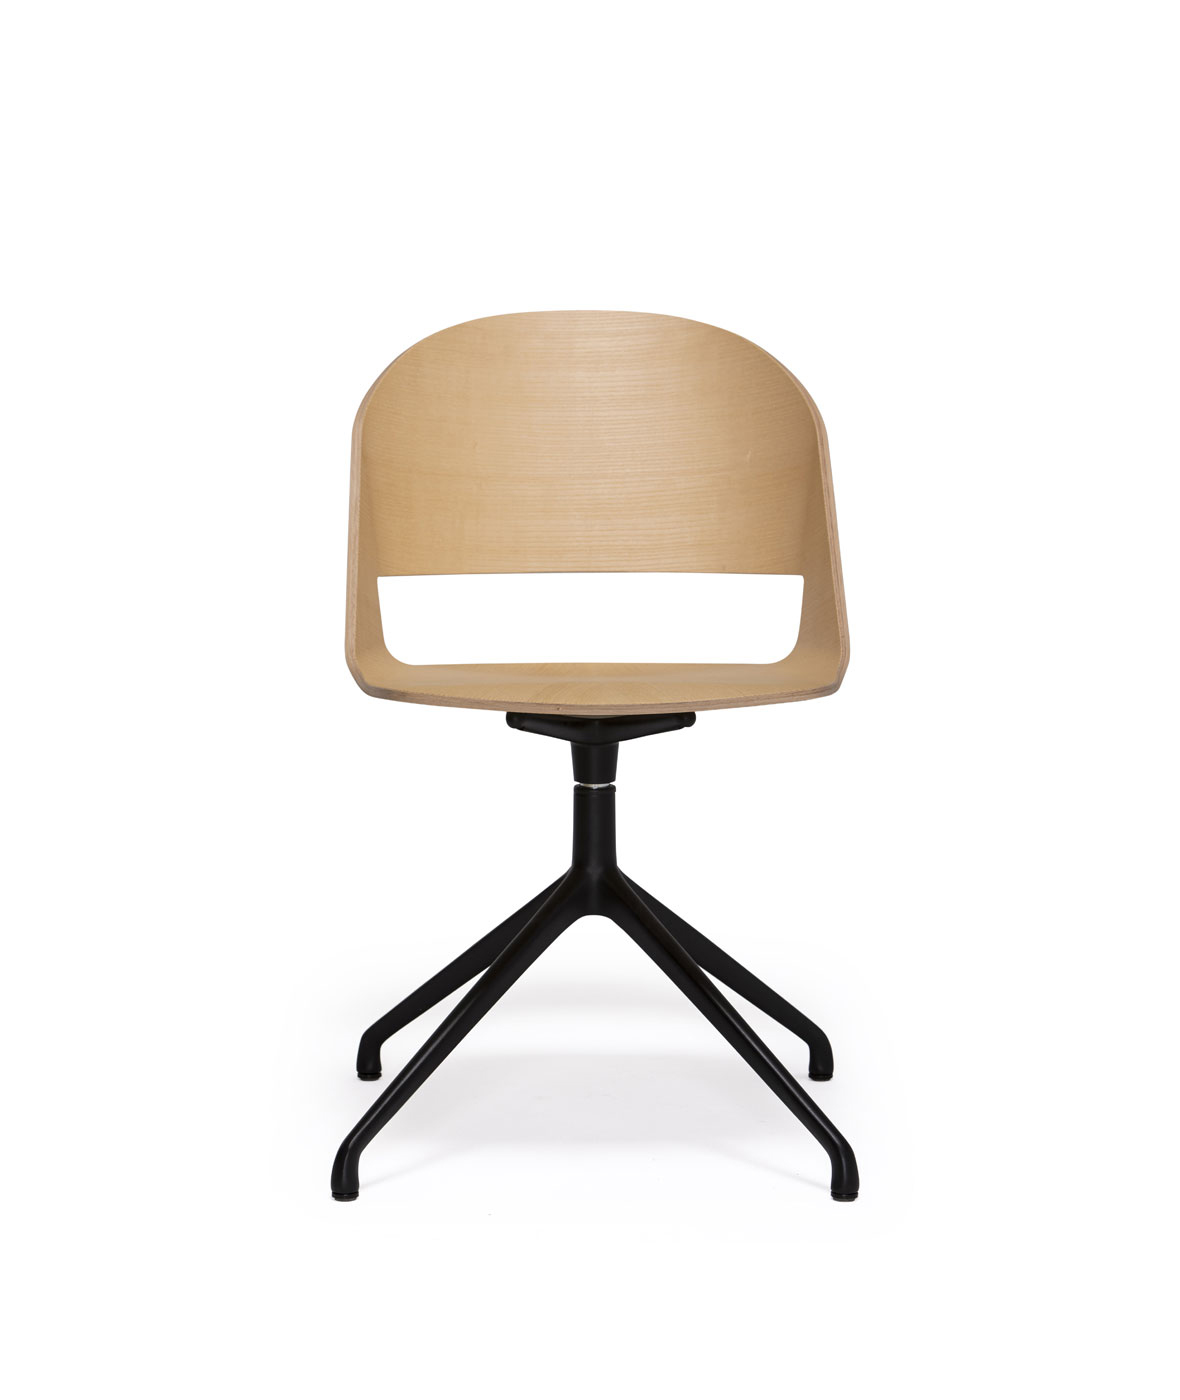 Goose chair Model C with 4 rollers swivel base - Vergés